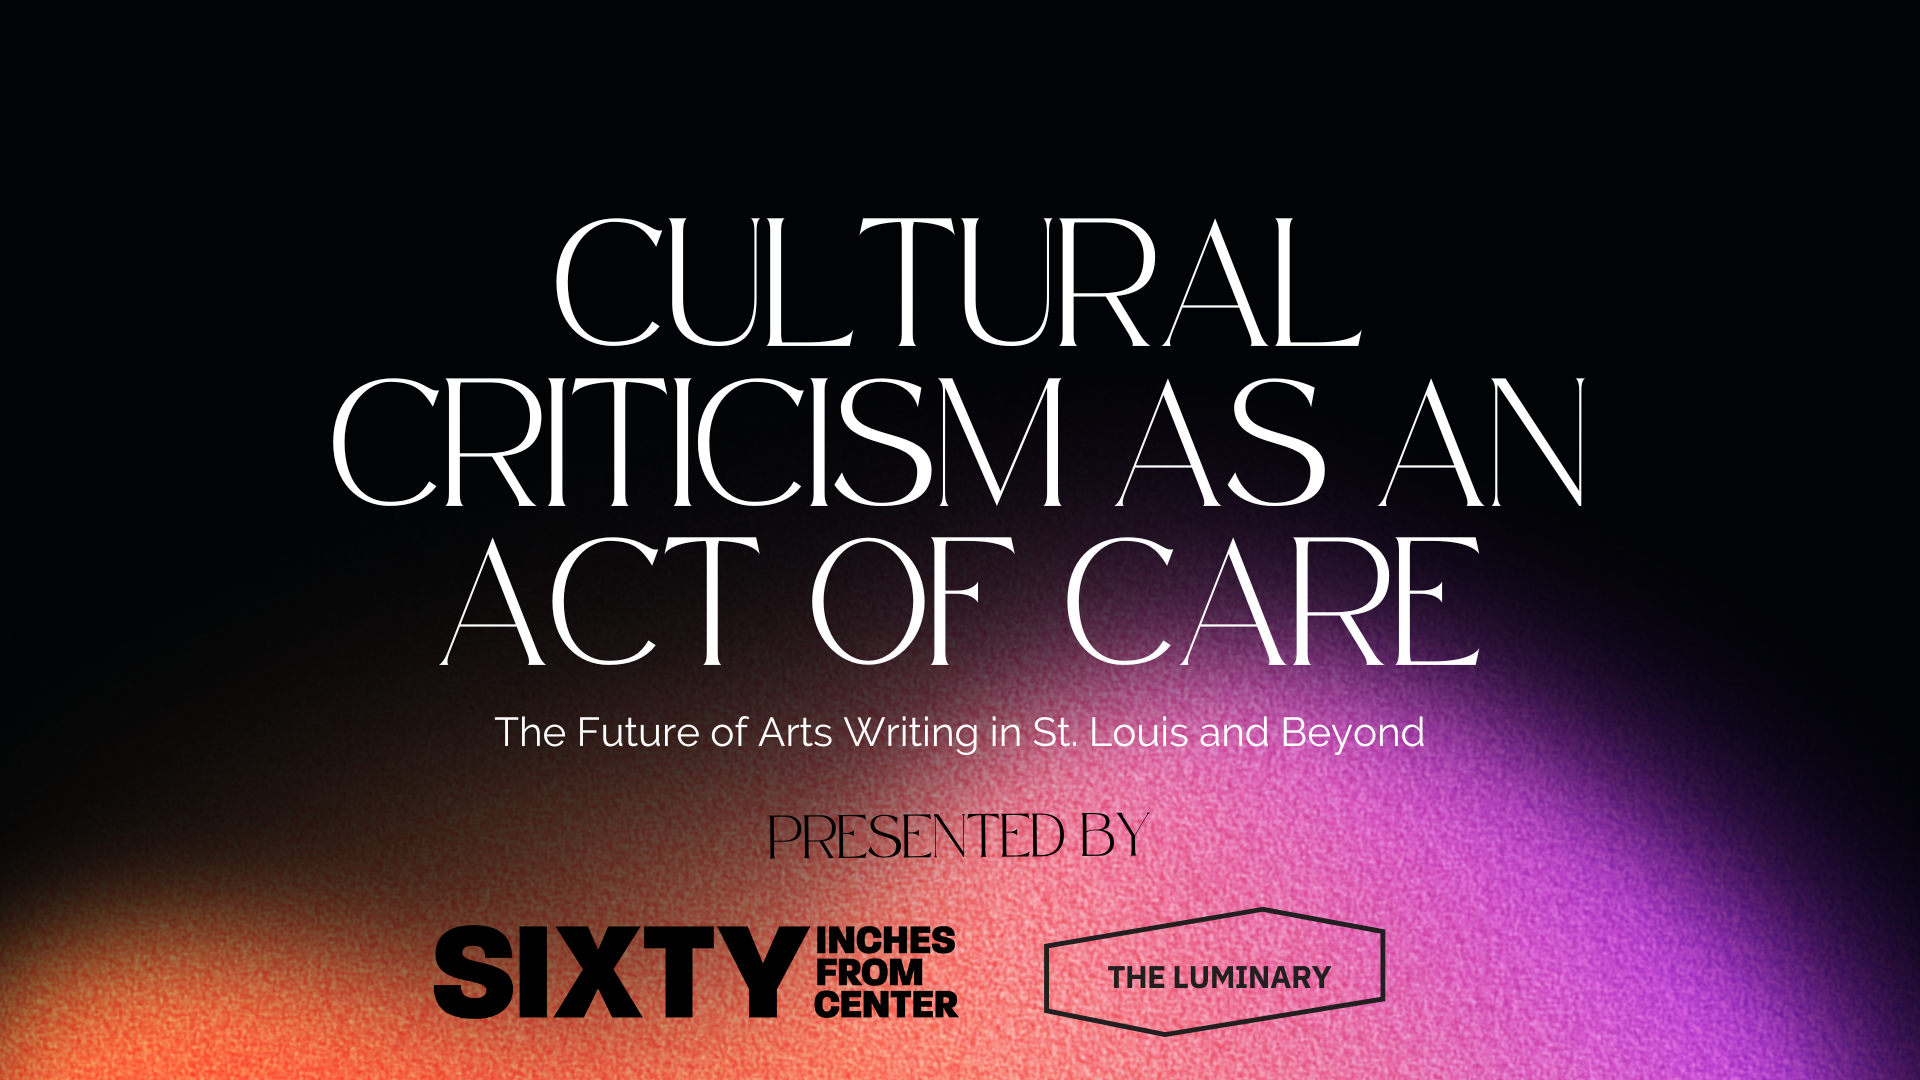 Image: A graphic that reads: "CULTURAL CRITICISM AS AN ACT OF CARE" and "The Future of Arts Writing in St. Louis and Beyond". Sixty and The Luminary's logos are at the bottom of the graphic. The background is black, orange, and magenta.